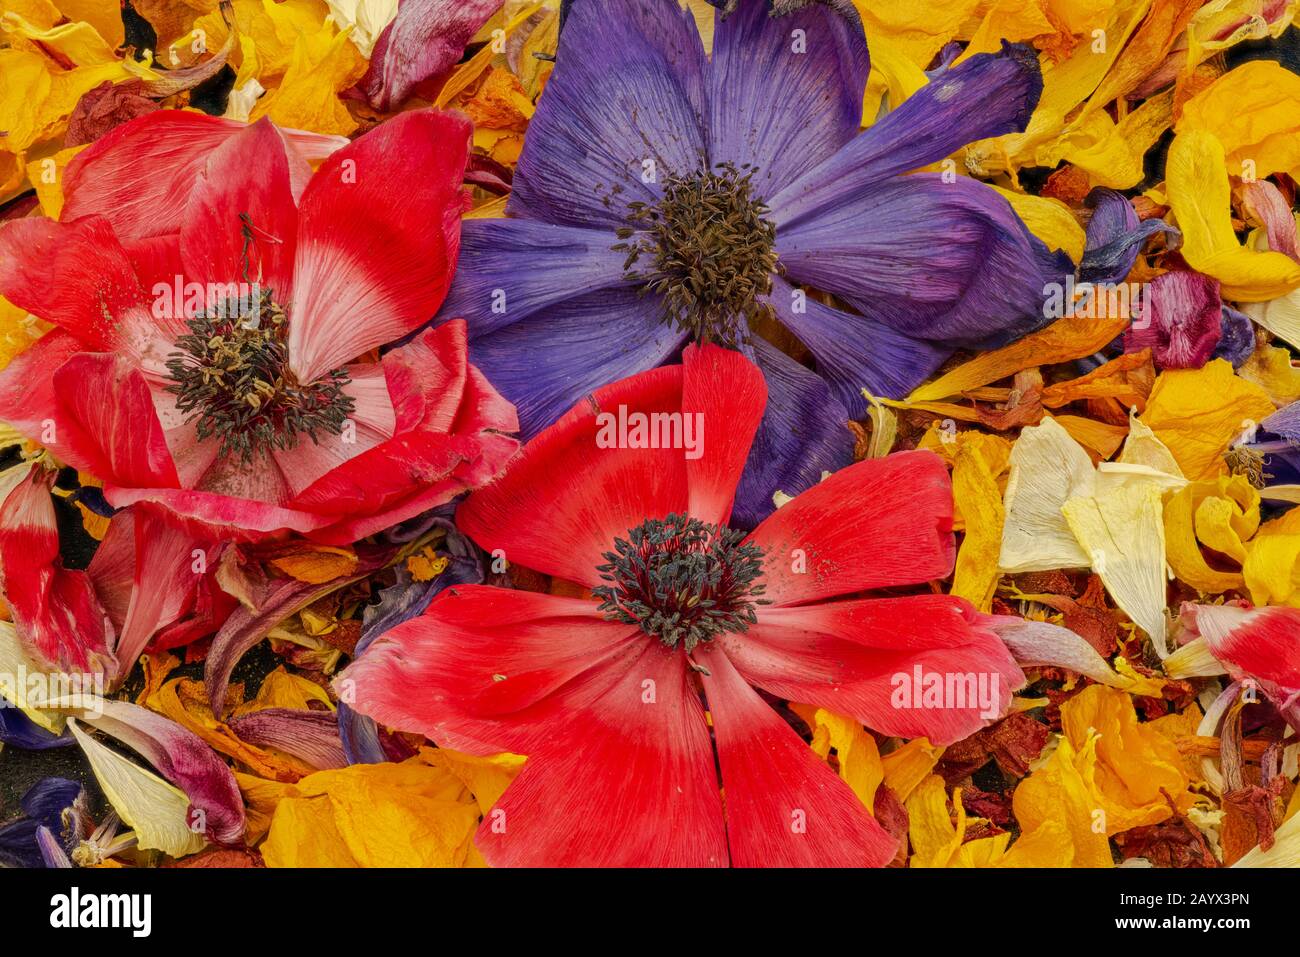 Three red and violet anemone blossoms on a colorful bed of petals macro Stock Photo